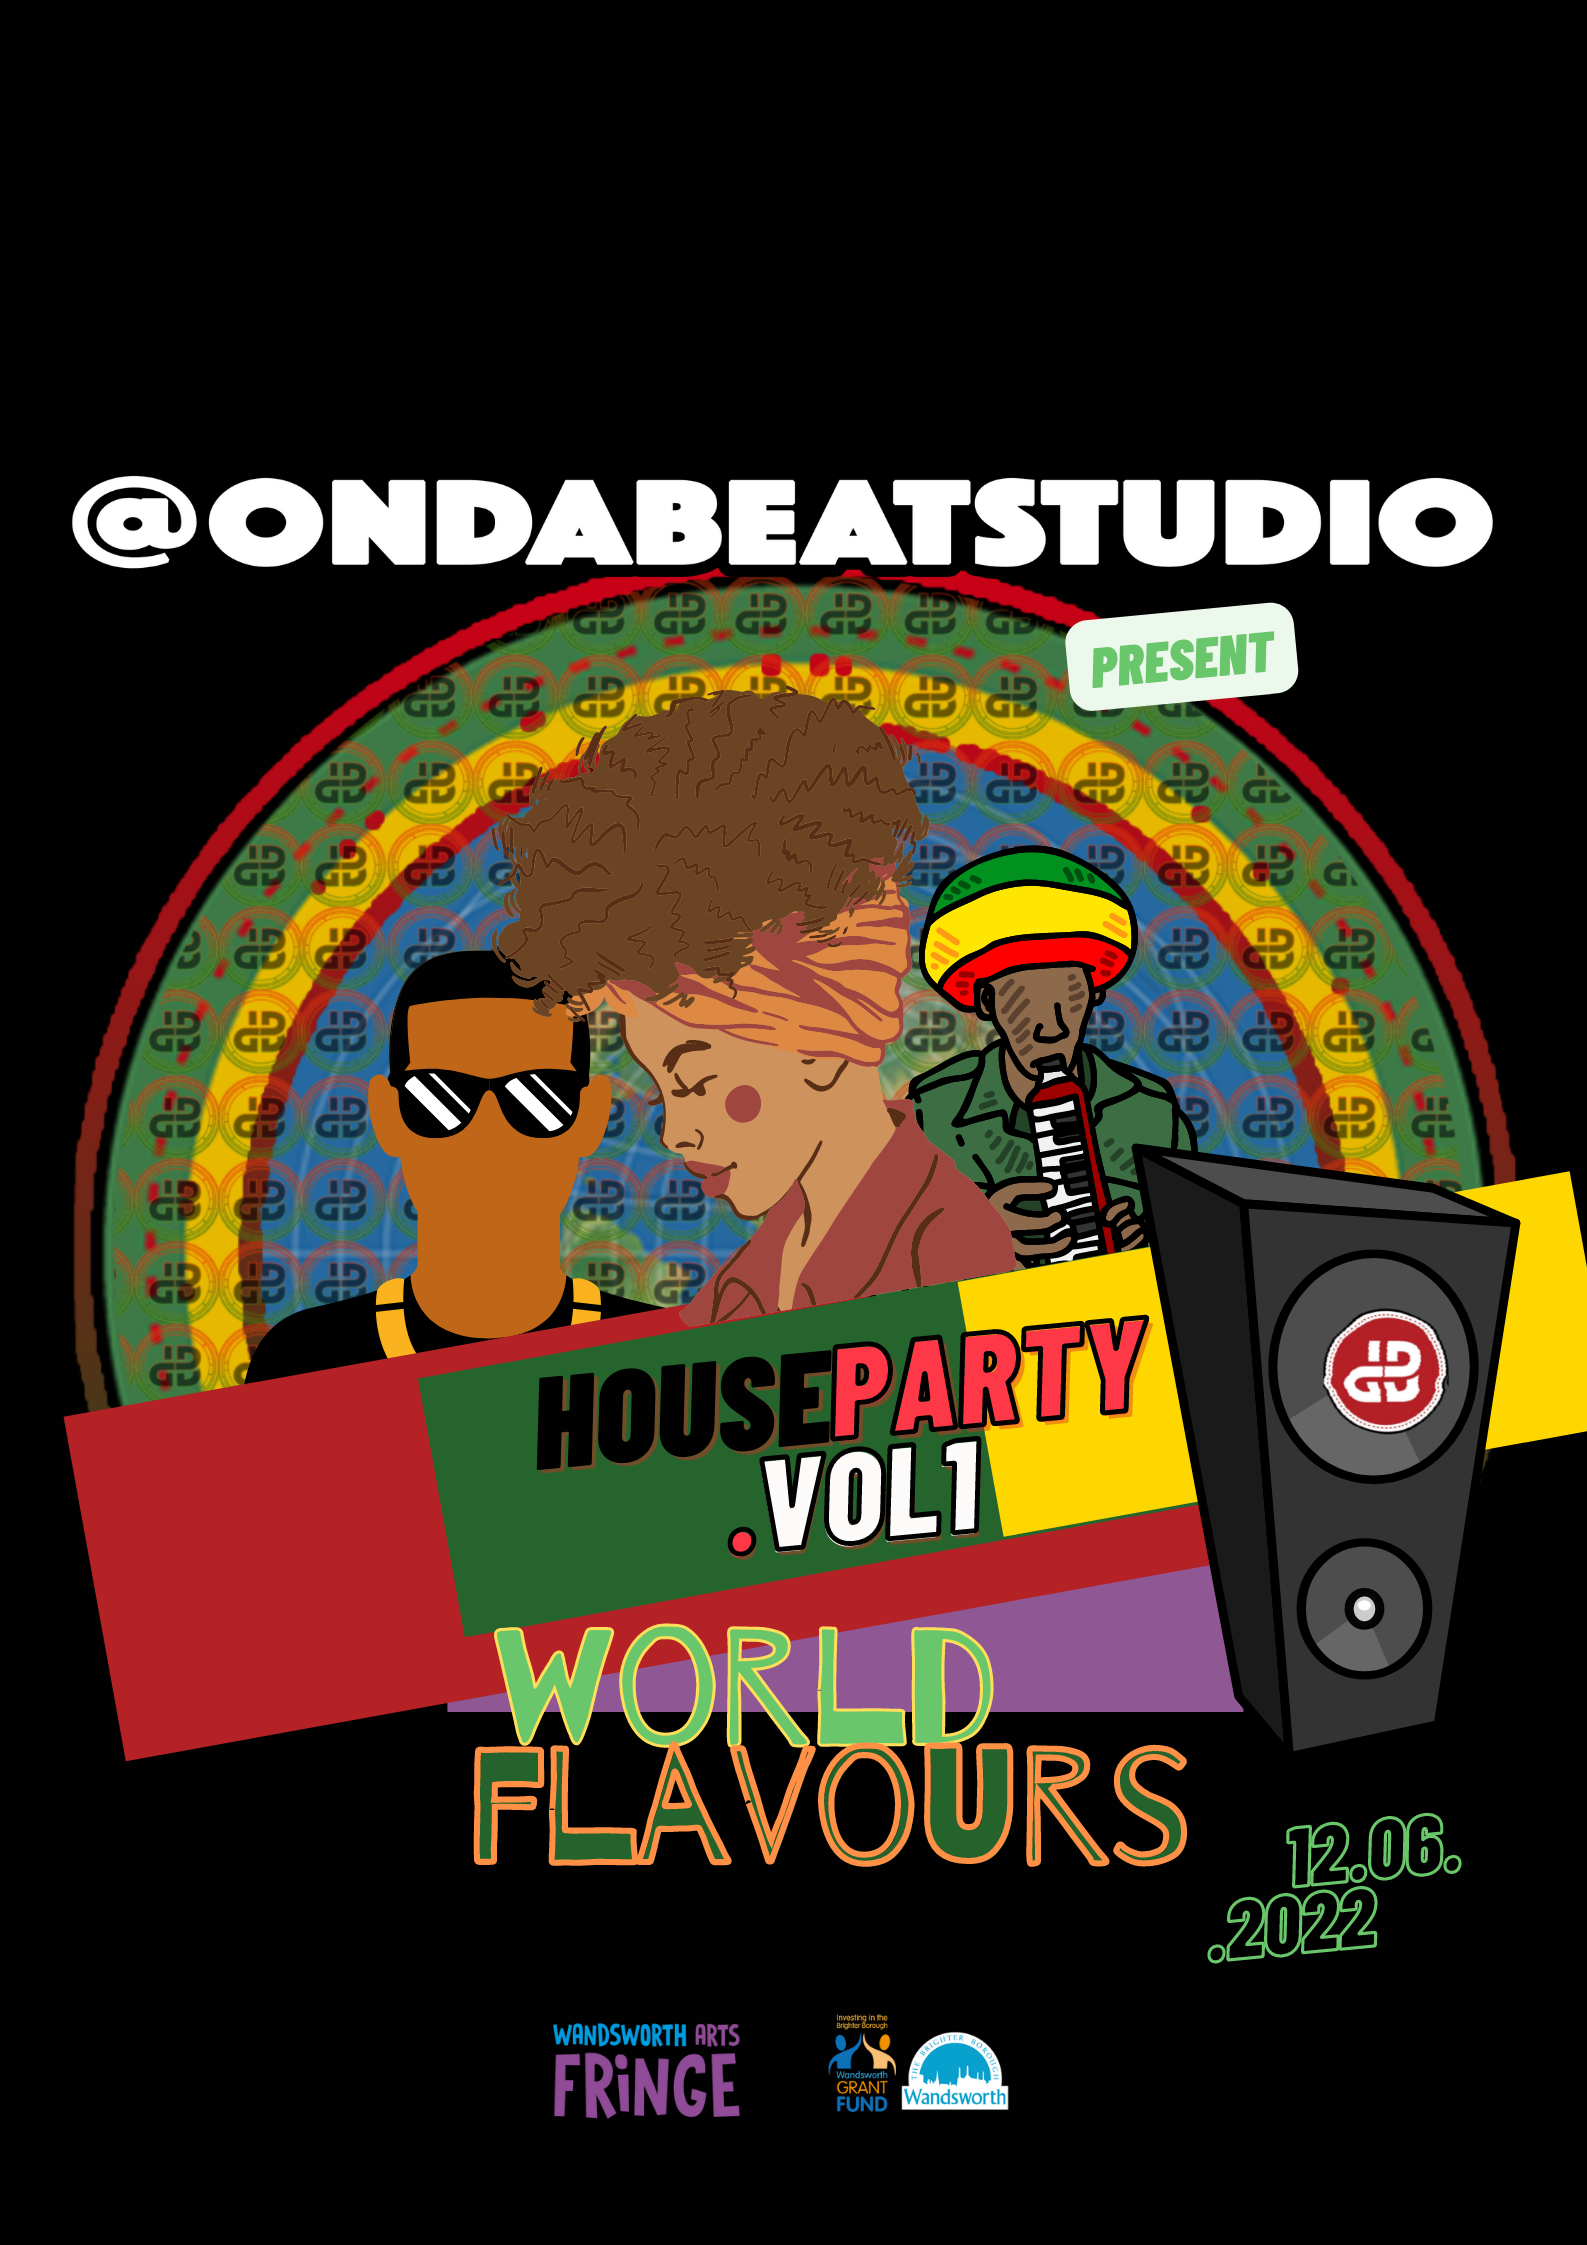 WAF - 10—26 JUNE 2022 flyer poster  ondabeat studio houseparty Southern flavours World Flavours